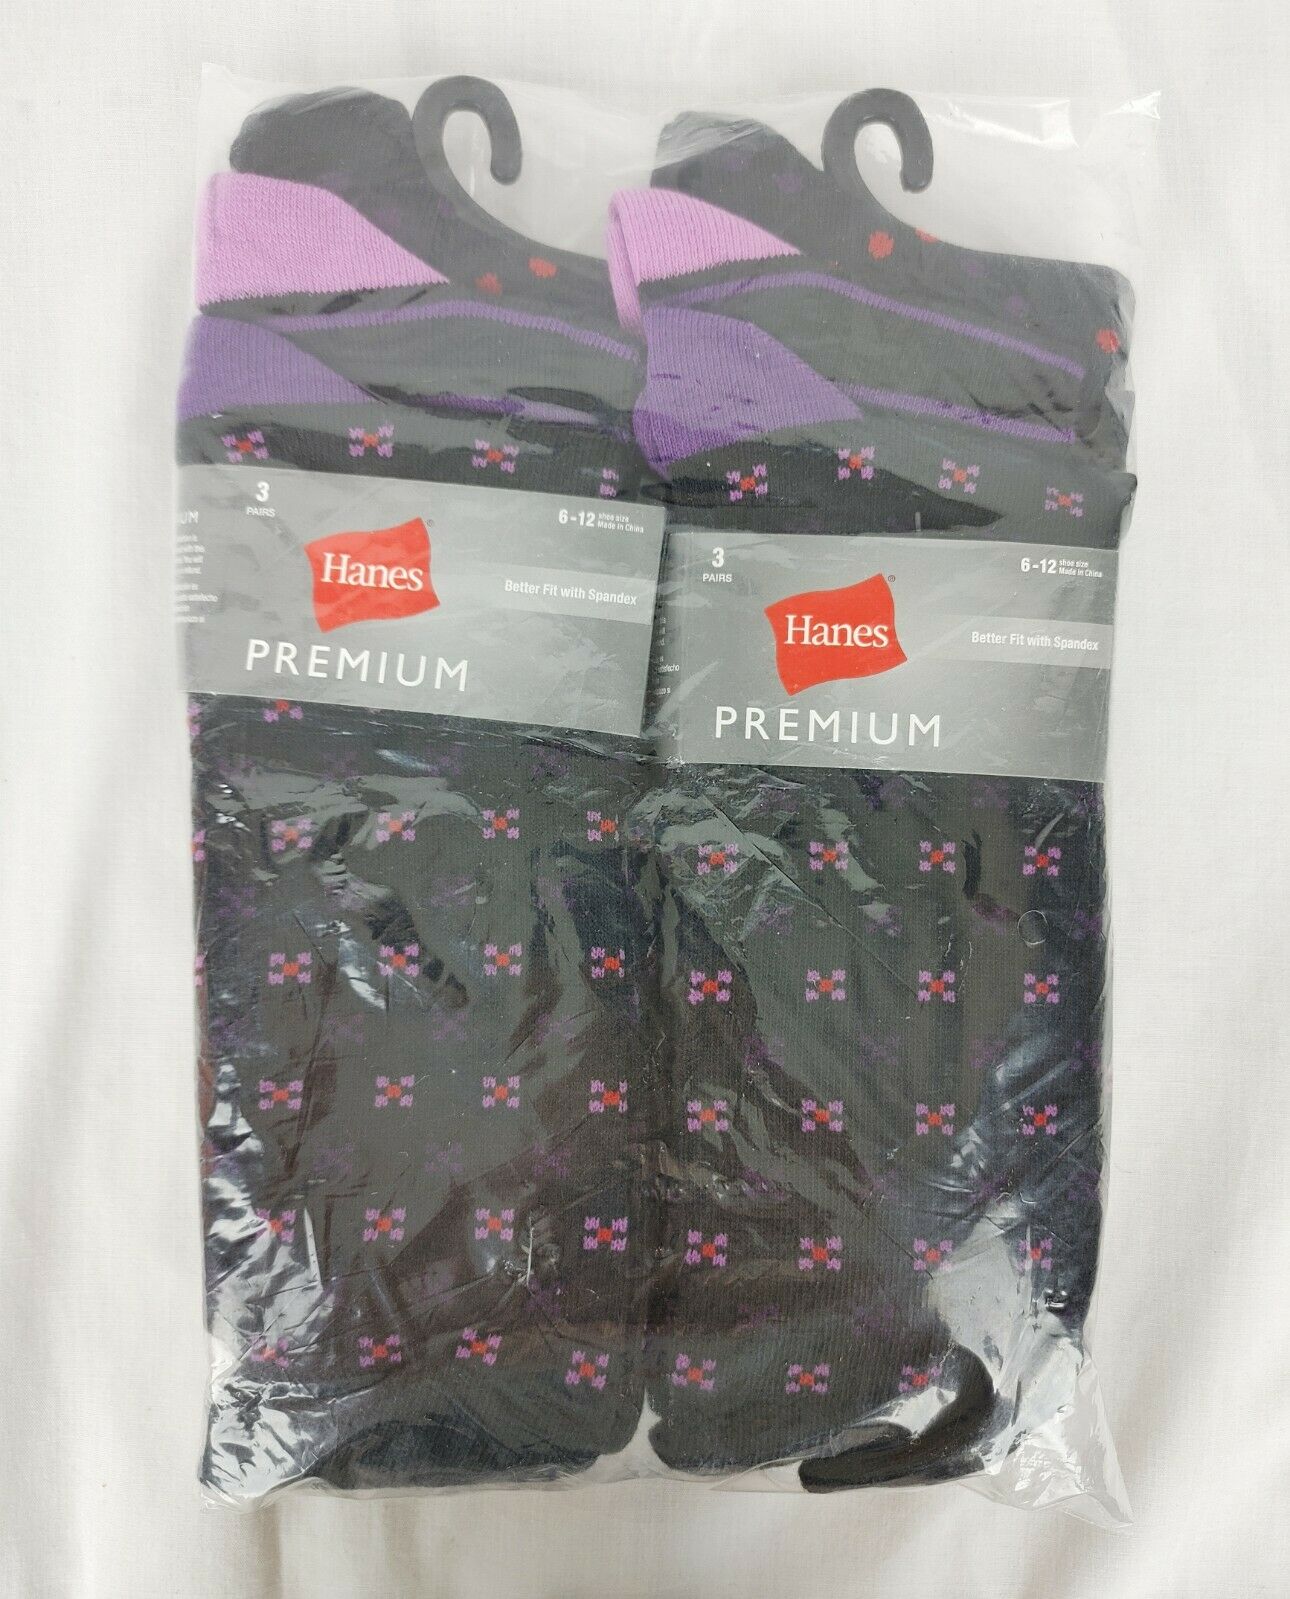 2 Pk Hanes Premium Socks Shoe Size 6-12 Better Fit With Spandex 3 Pair each Pack